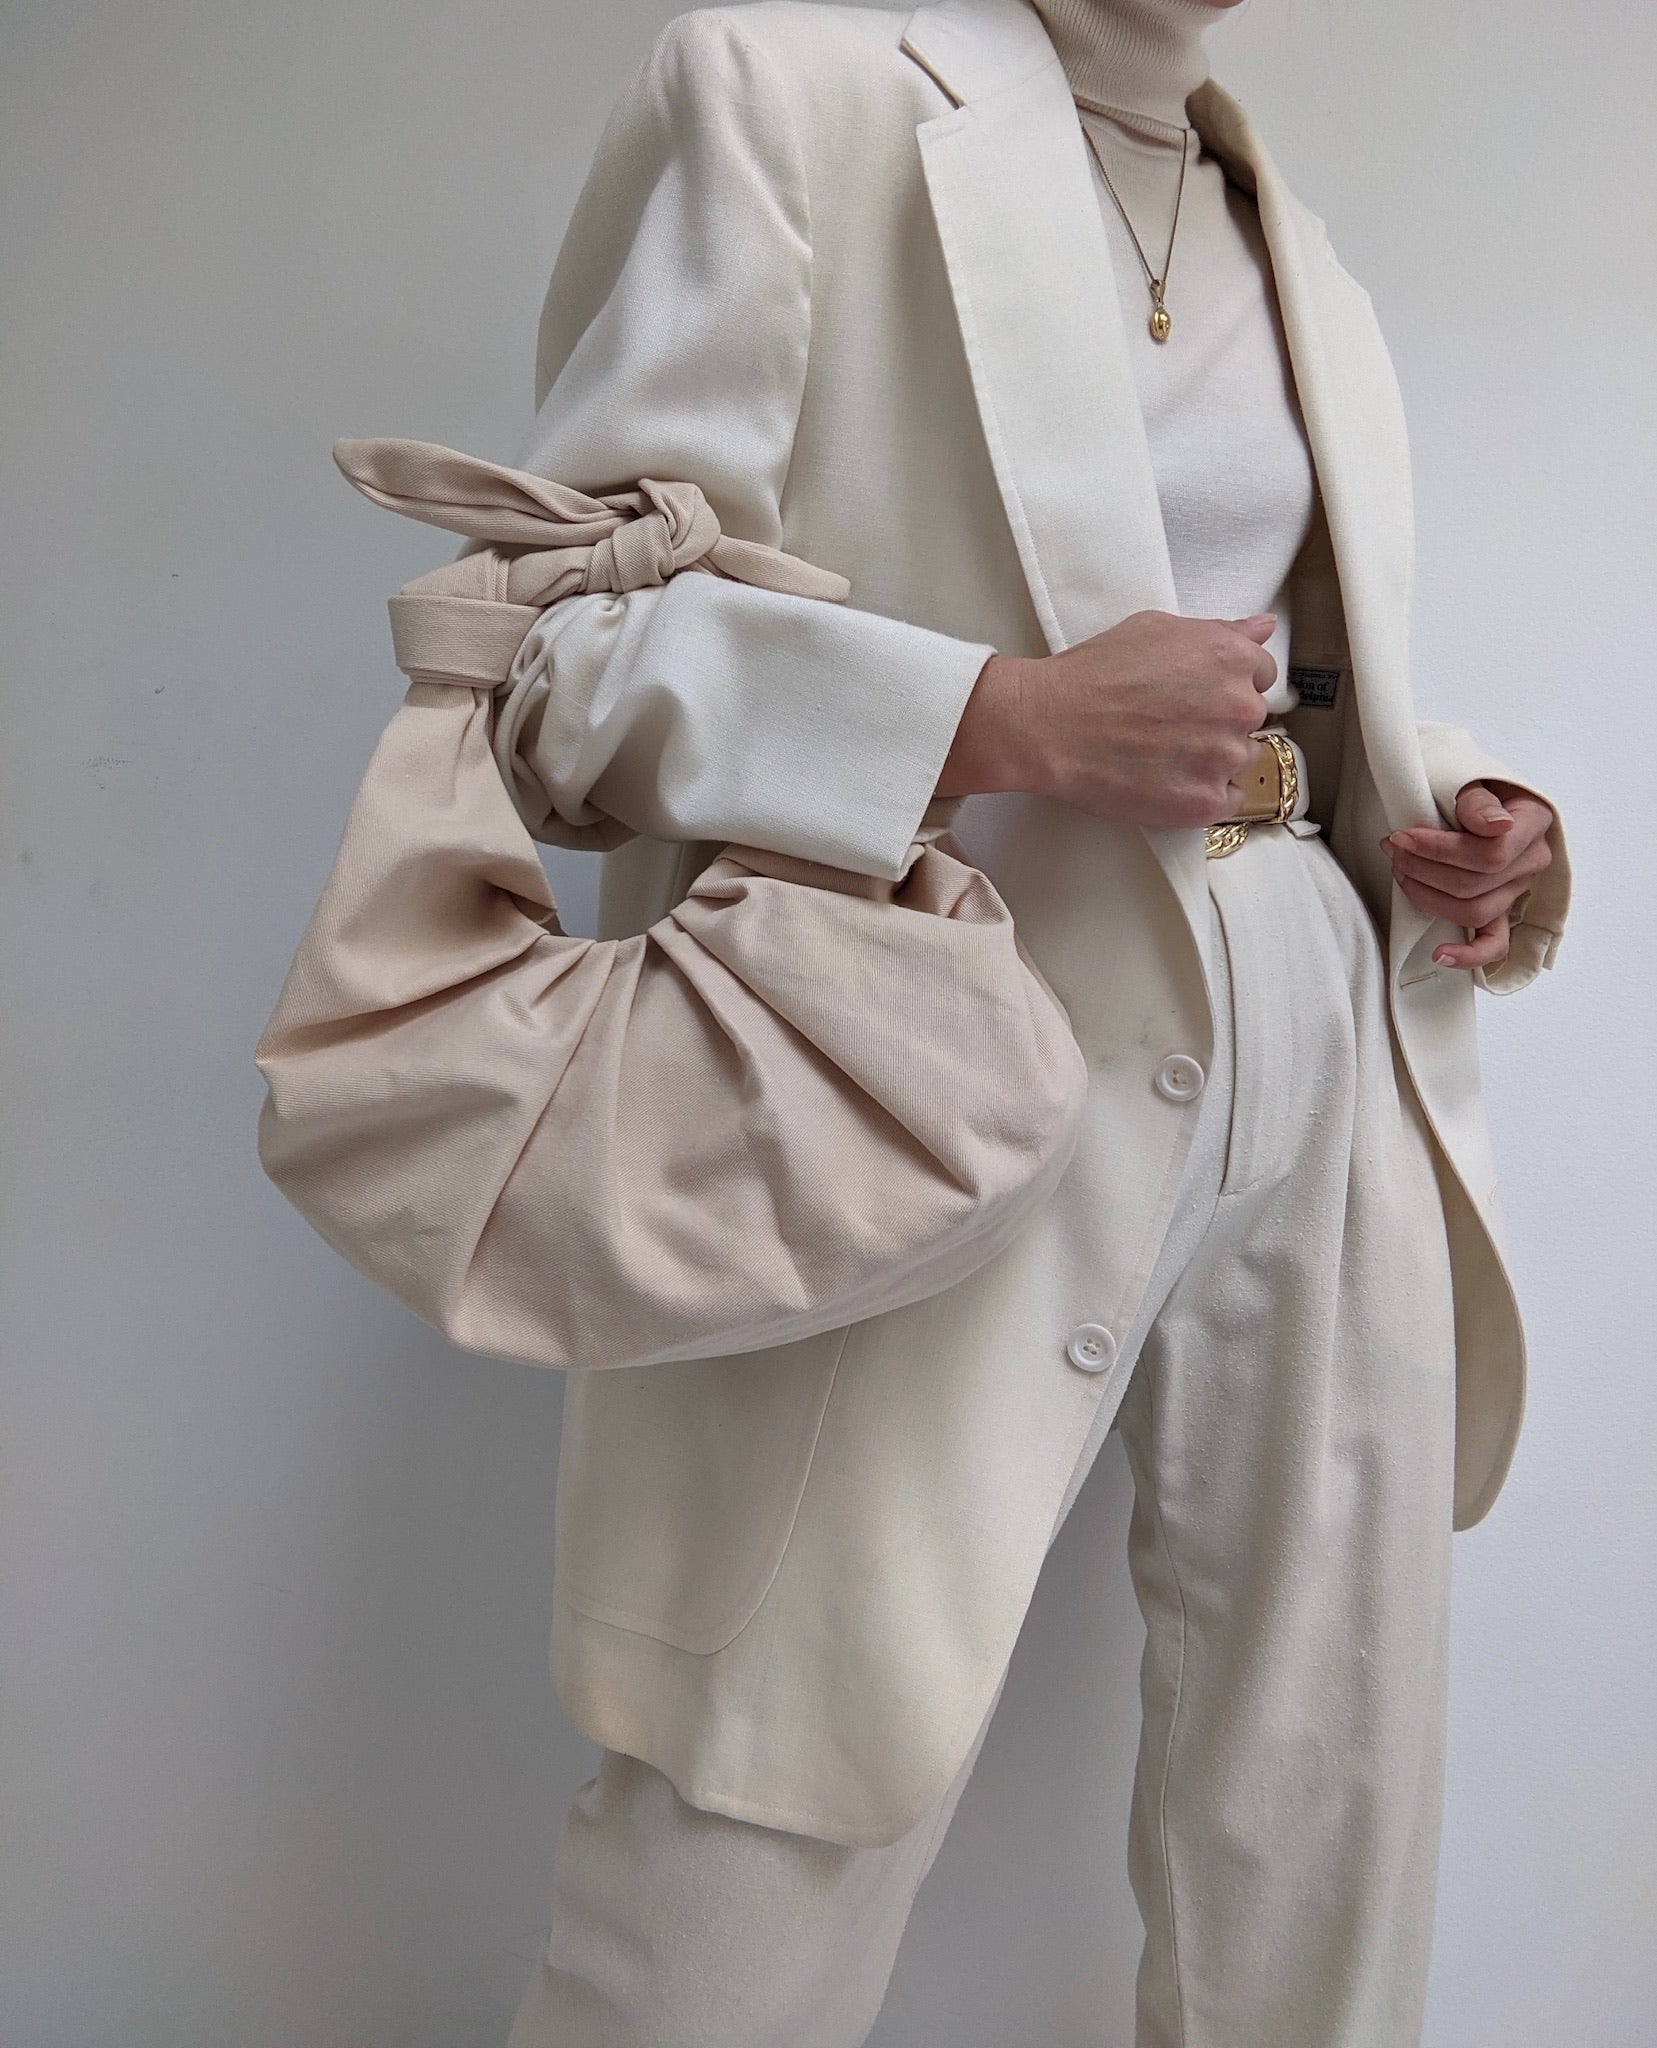 A Bronze Age Cotton Kimi Croissant Bag / Available in Sand – NA NIN